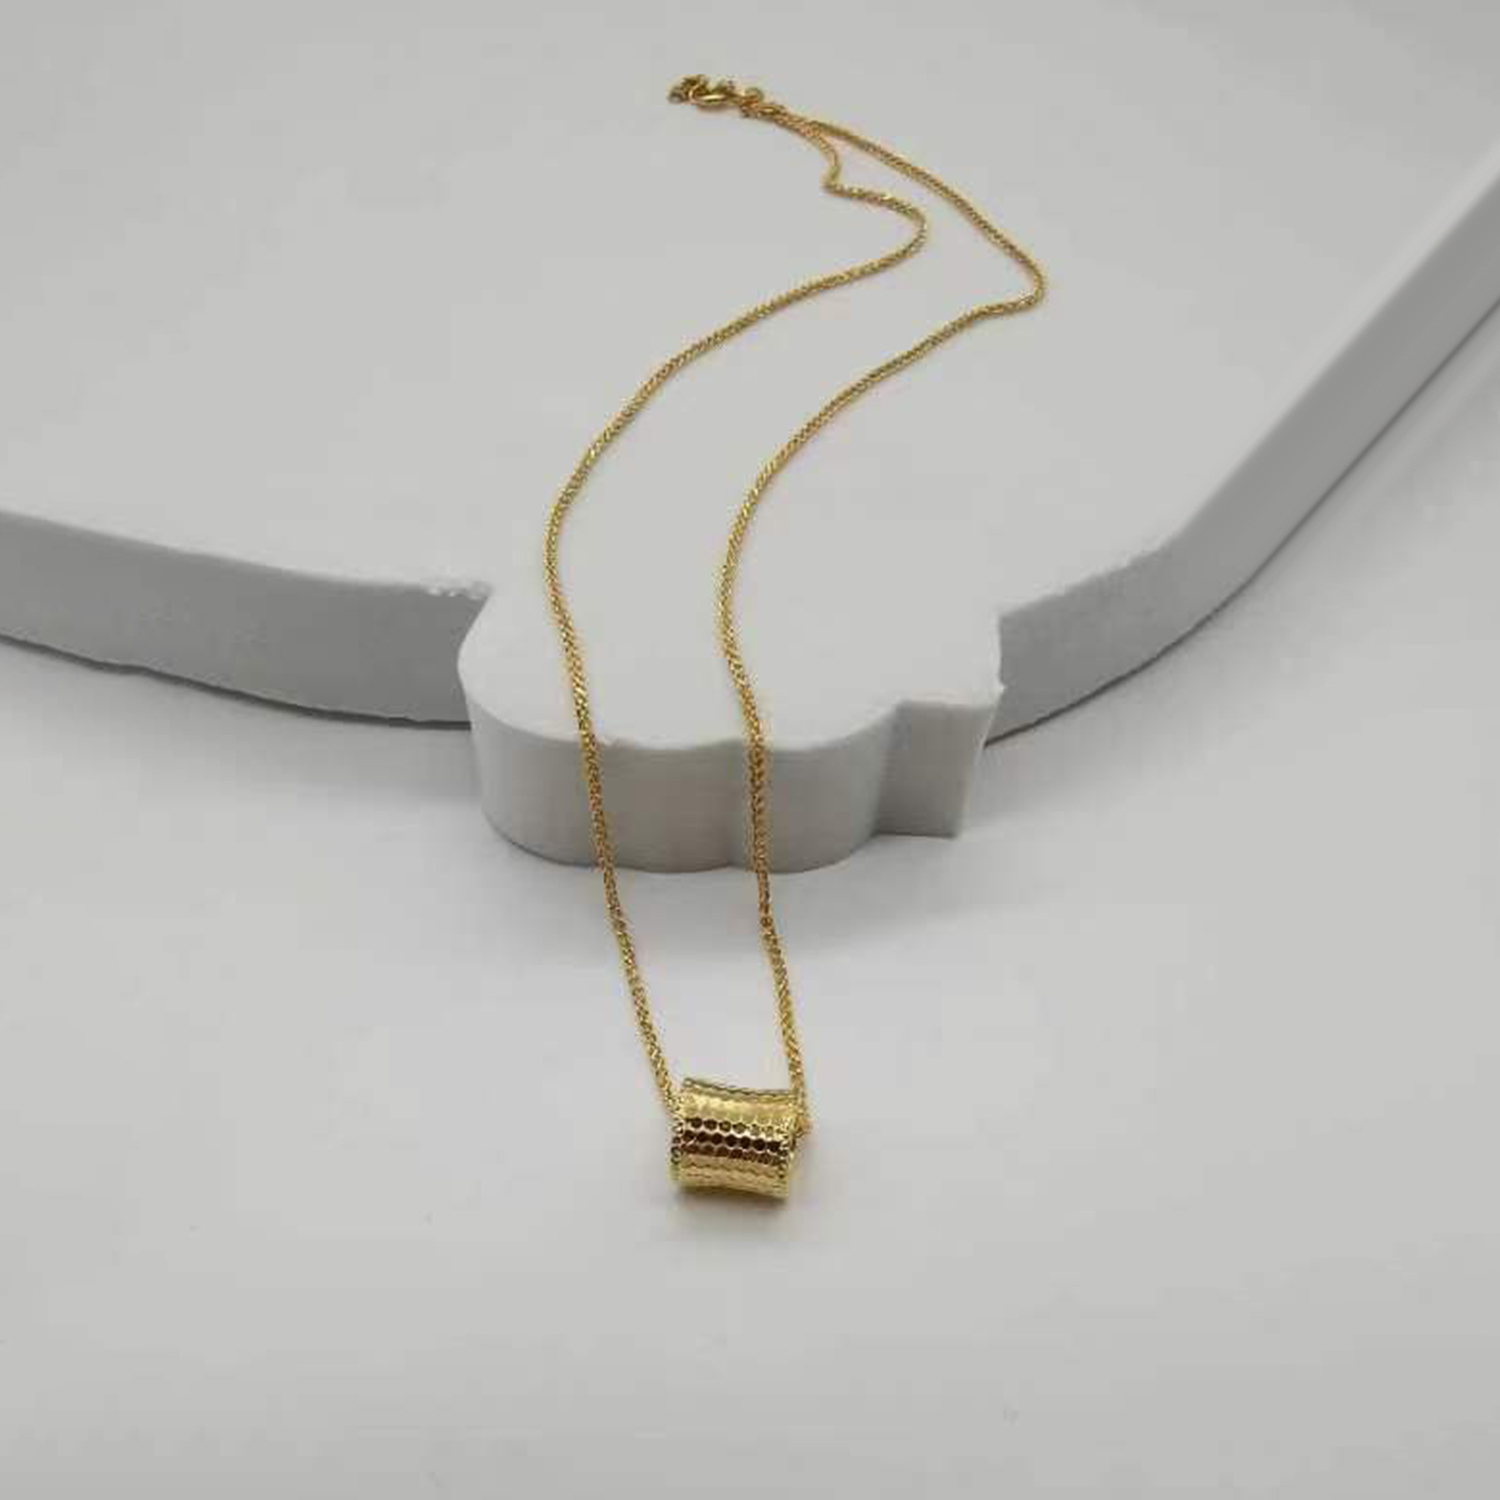 Alluvial gold vacuum electroplating 24K gold fish scale waist necklace